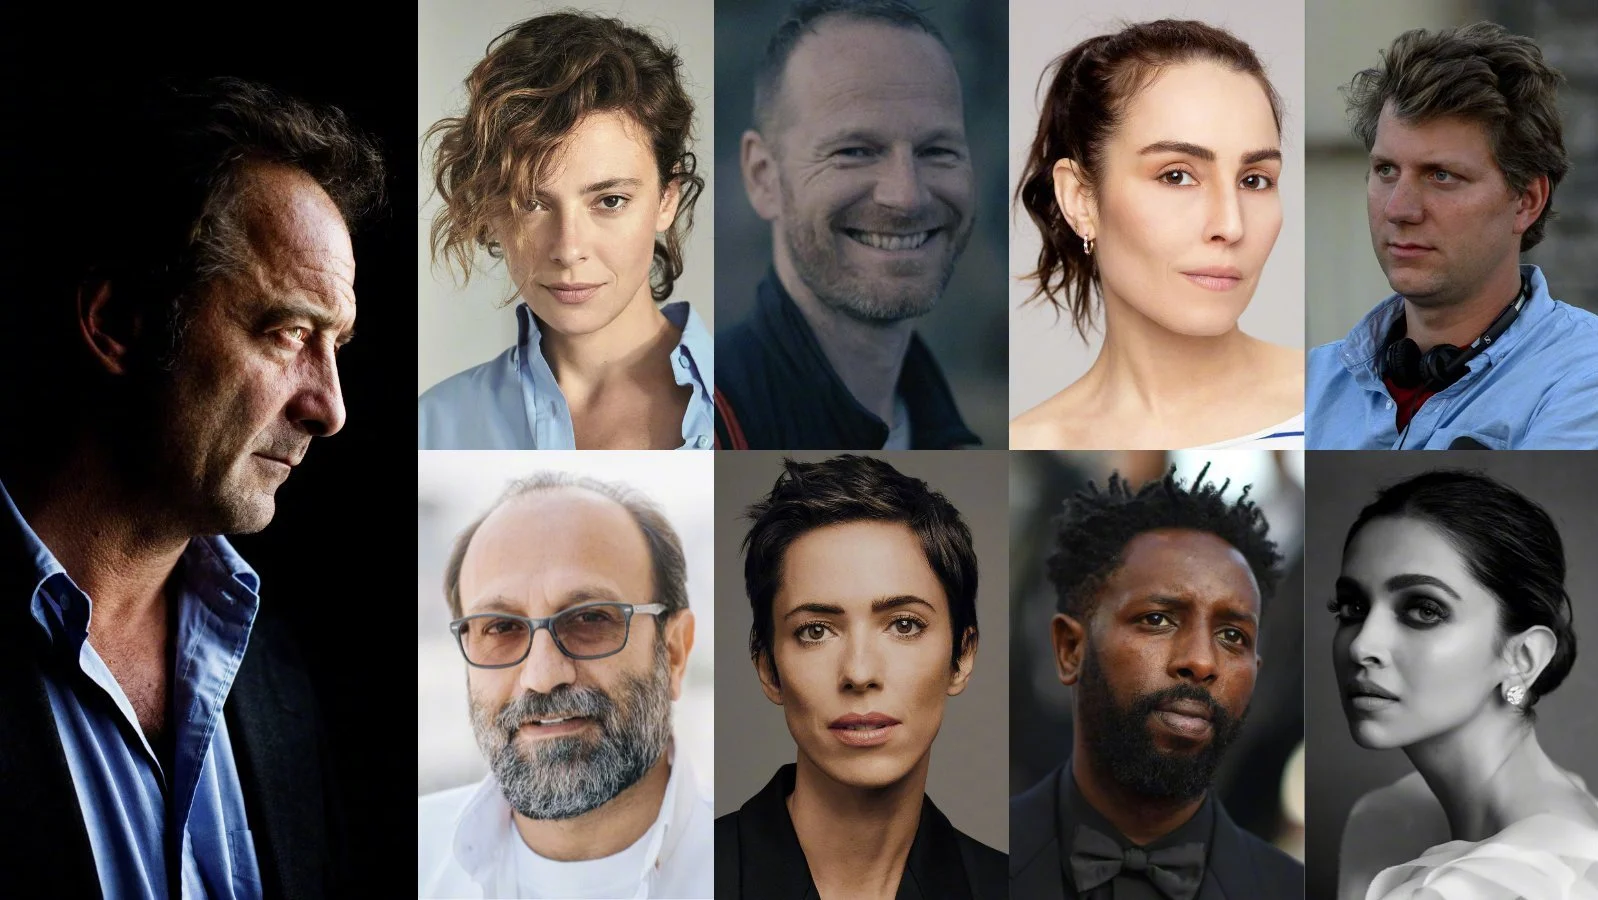 The 75th Cannes Main Competition announces the jury lineup, with Vincent Lindon as chairman